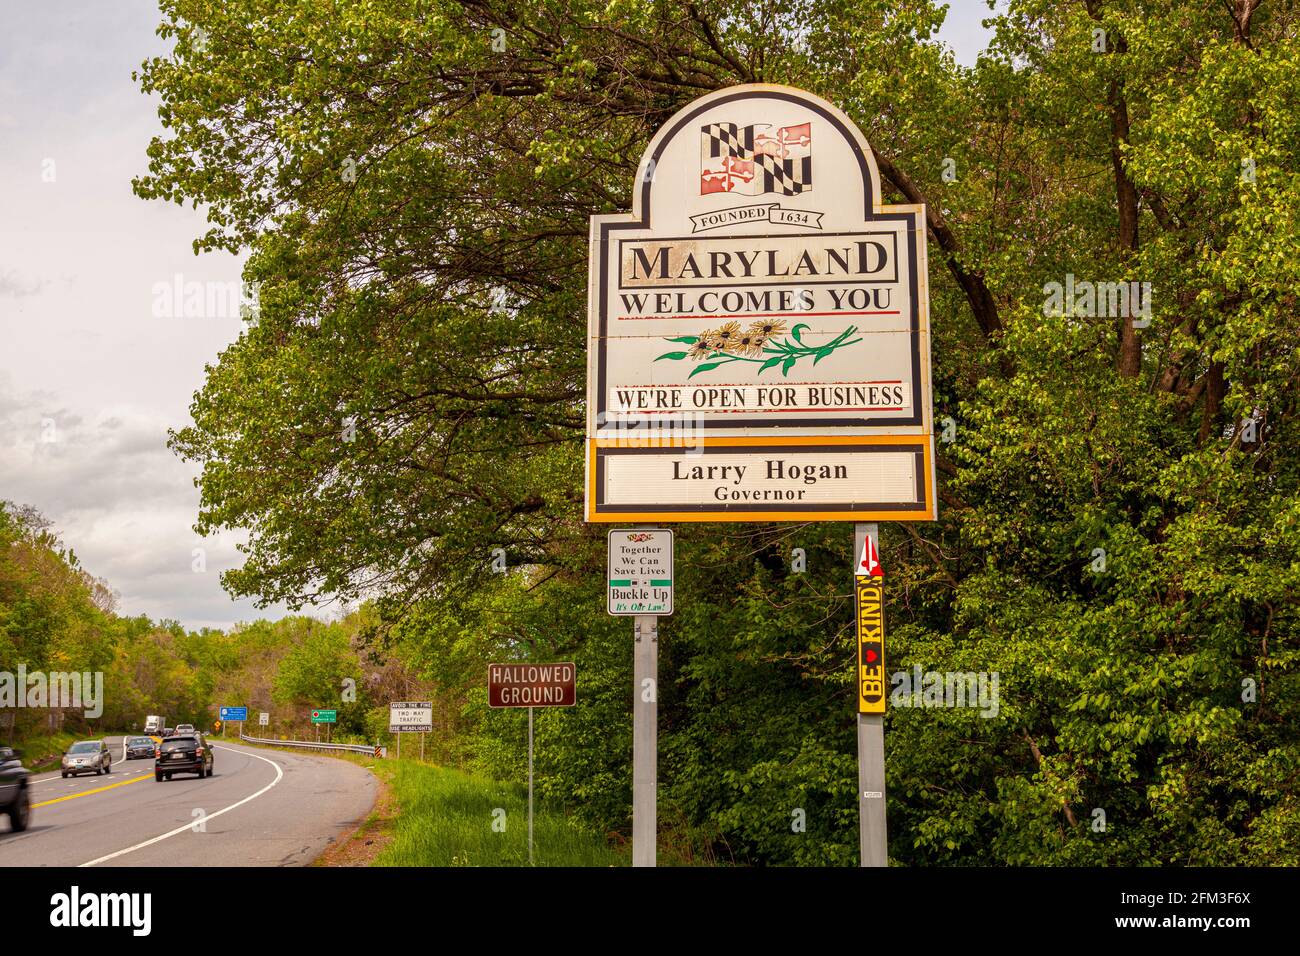 Maryland Welcomes You road sign on the scenic byway US Route 15 at the border of Maryland and Virginia.  It has MD flag and says open for business. Stock Photo